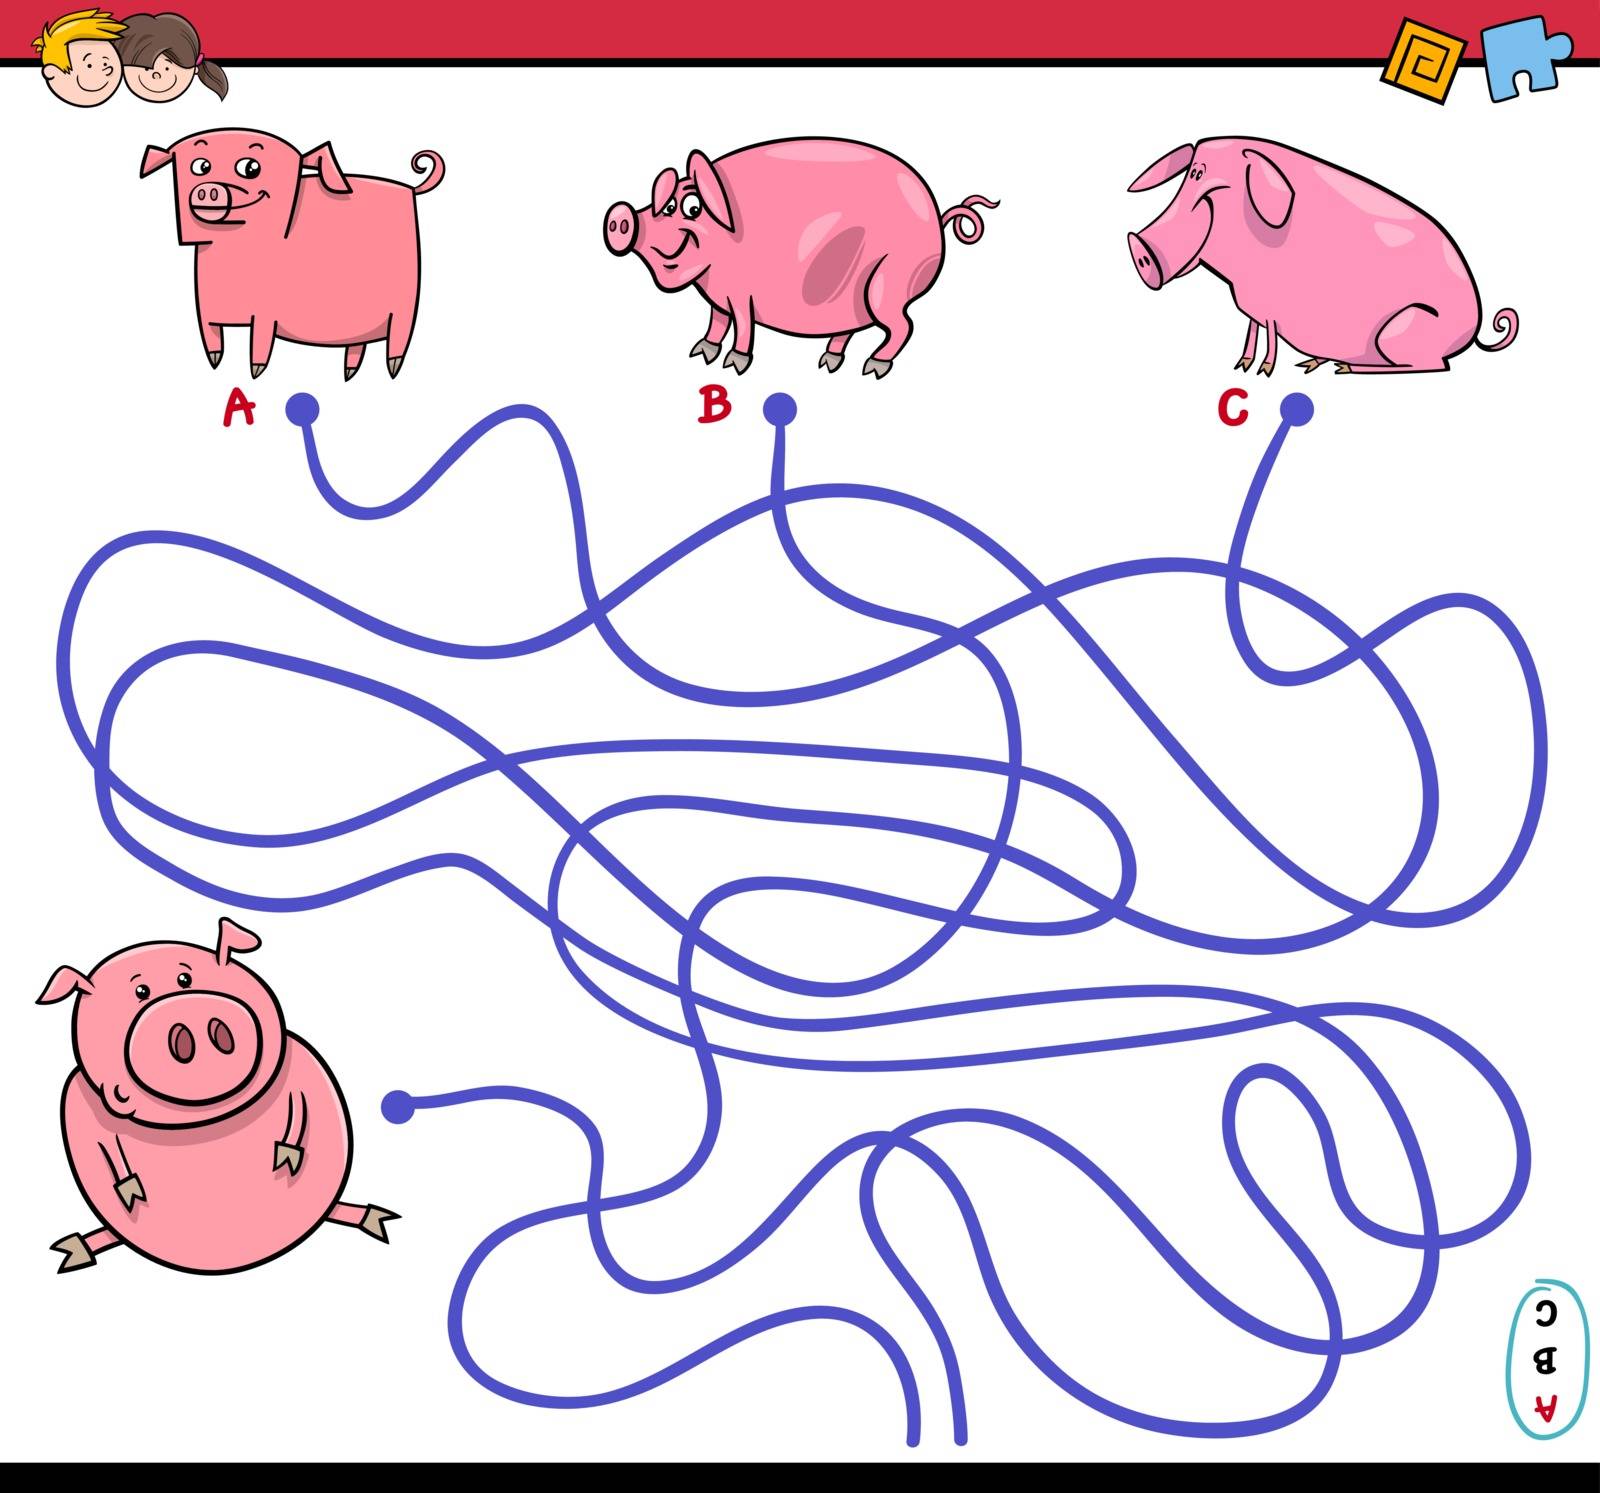 Cartoon Illustration of Paths or Maze Puzzle Activity Game with Pigs and Piglet Farm Animal Characters